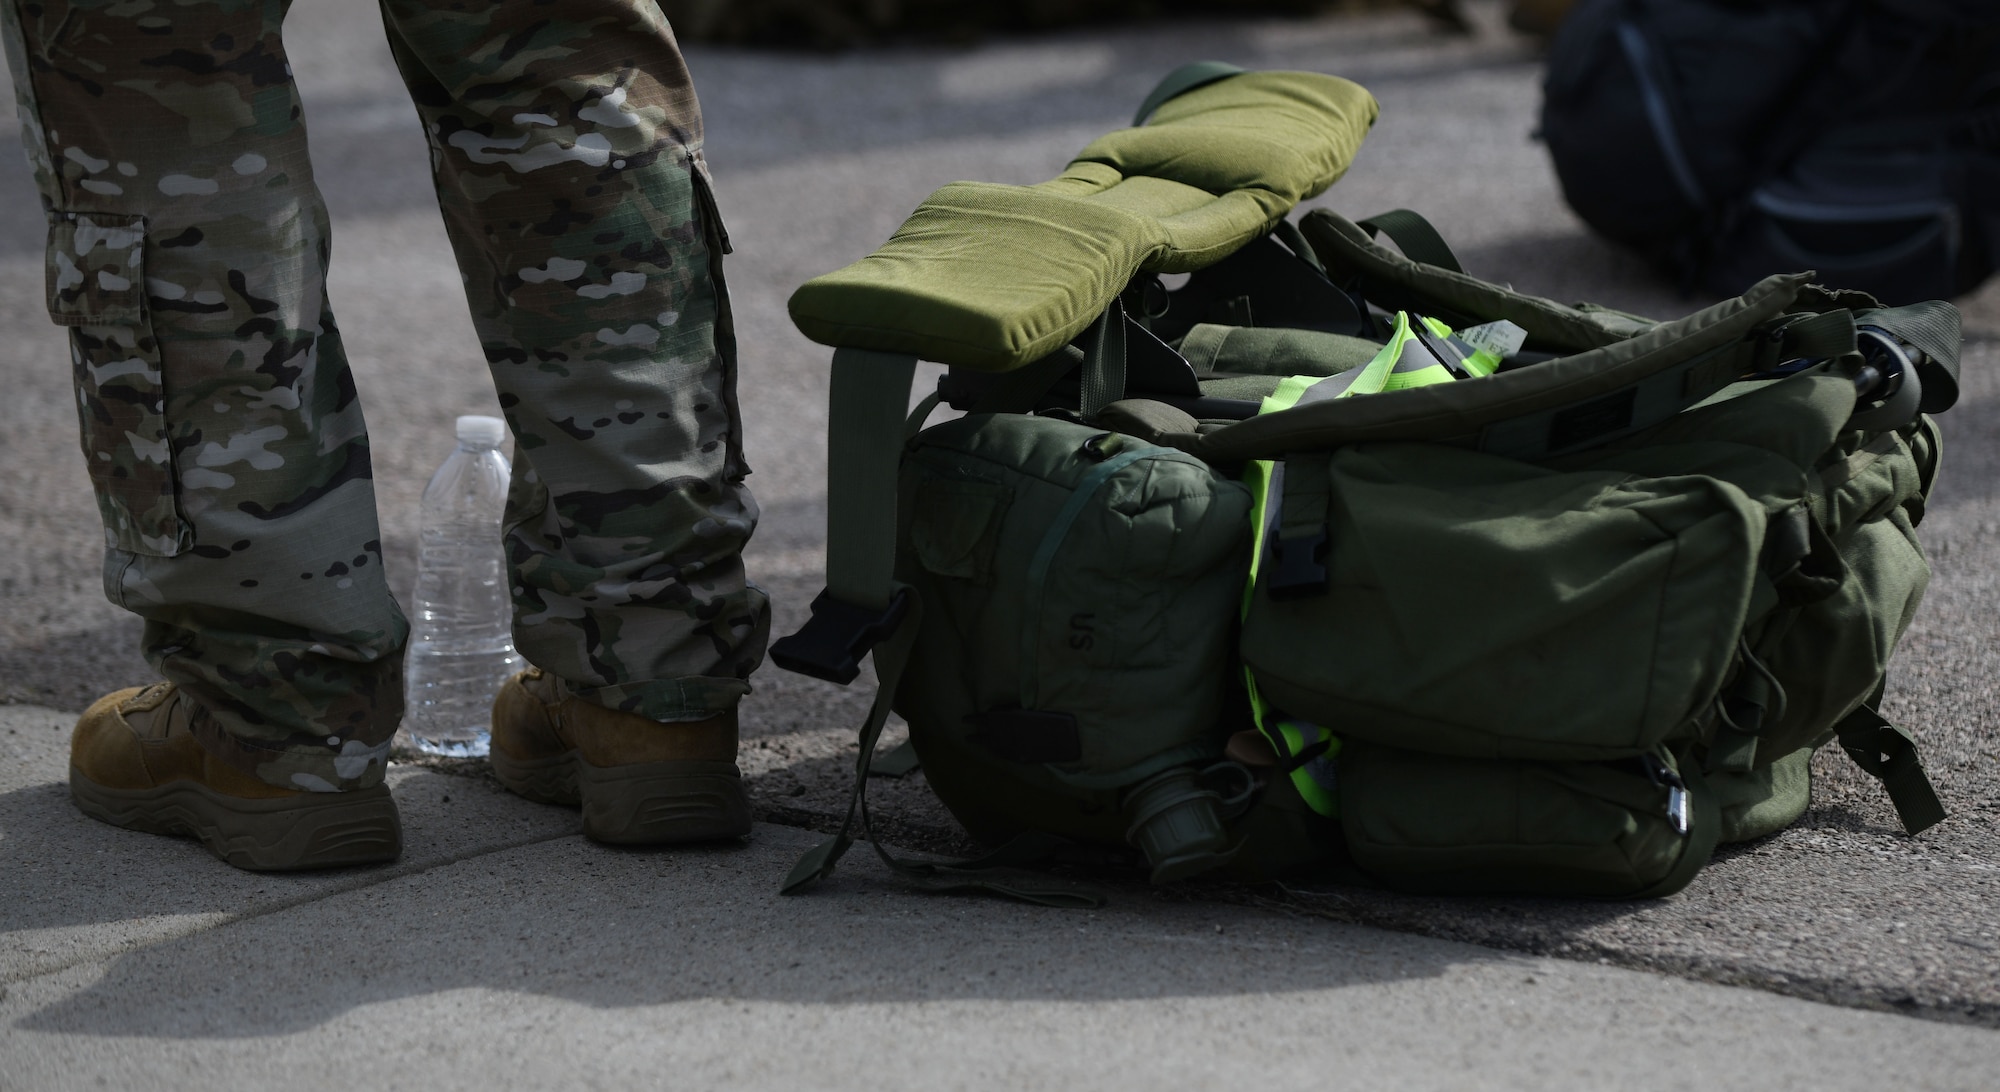 An Airman stands beside his rucksack as he waits for it to be weighed during the Police Week Ruck Challenge at Heritage Lake on Ellsworth Air Force Base, S.D., May 13, 2019. Participants had the option of filling their rucksacks with canned goods that were donated to Feeding South Dakota. Feeding South Dakota is an organization that provides food assistance to people throughout the state. (U.S. Air Force photo by Airman 1st Class Christina Bennett)